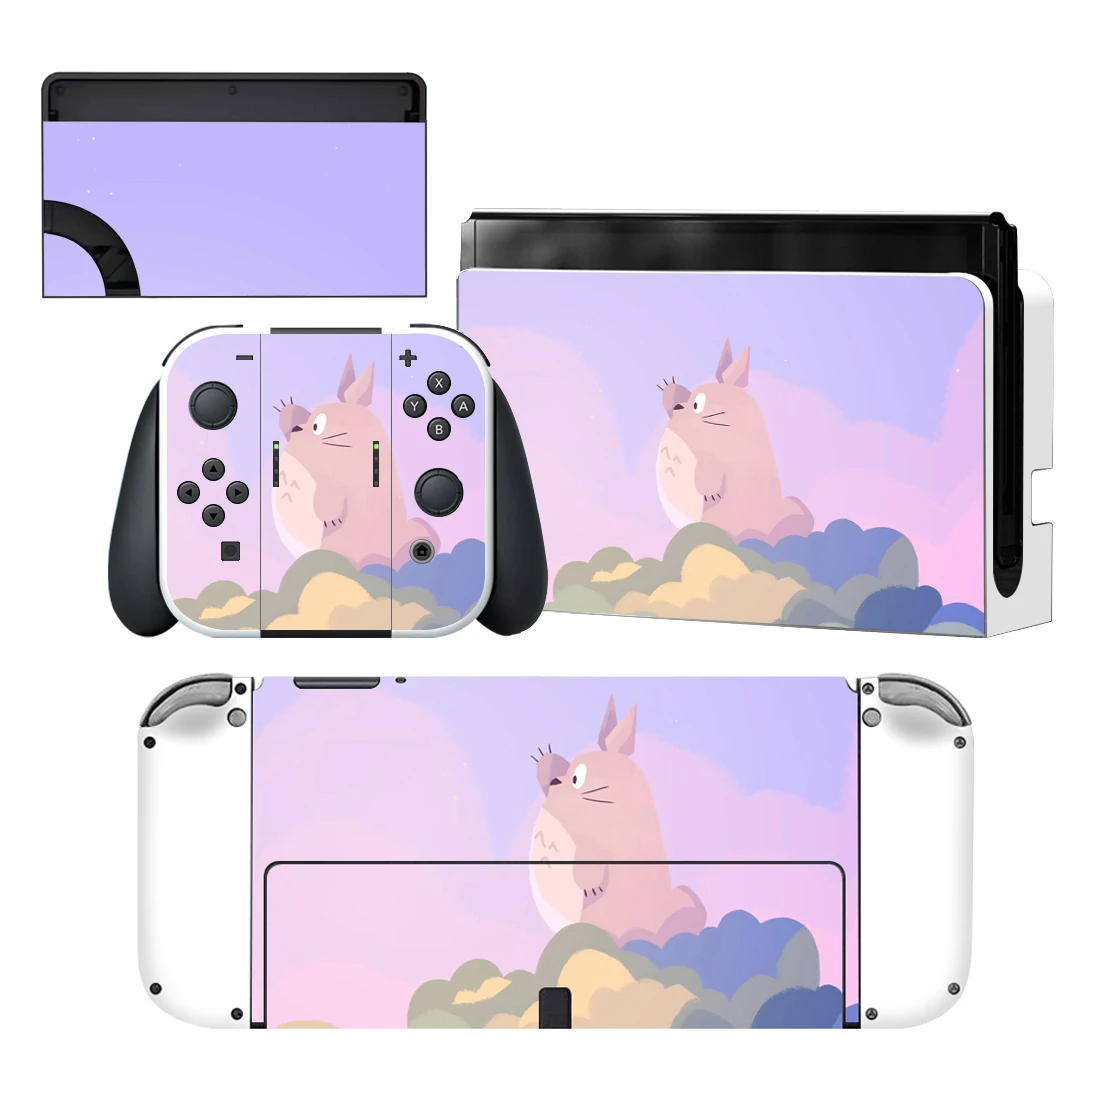 

MY NEIGHBOUR TOTORO Nintendoswitch Skin Cover Sticker Decal for Nintendo Switch OLED Console Joy-con Controller Dock Skin Vinyl